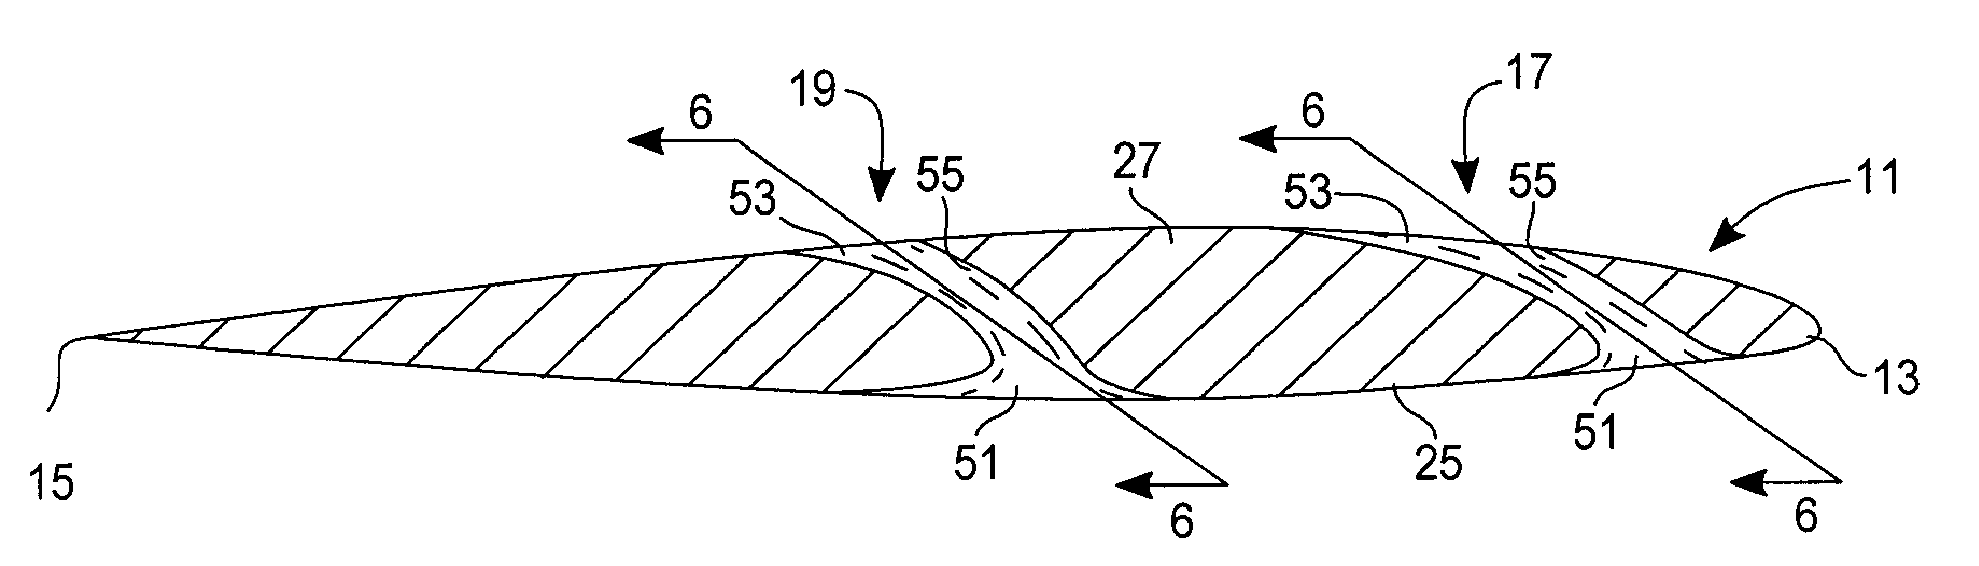 Fluid dynamic section having escapelet openings for reducing induced and interference drag, and energizing stagnant flow